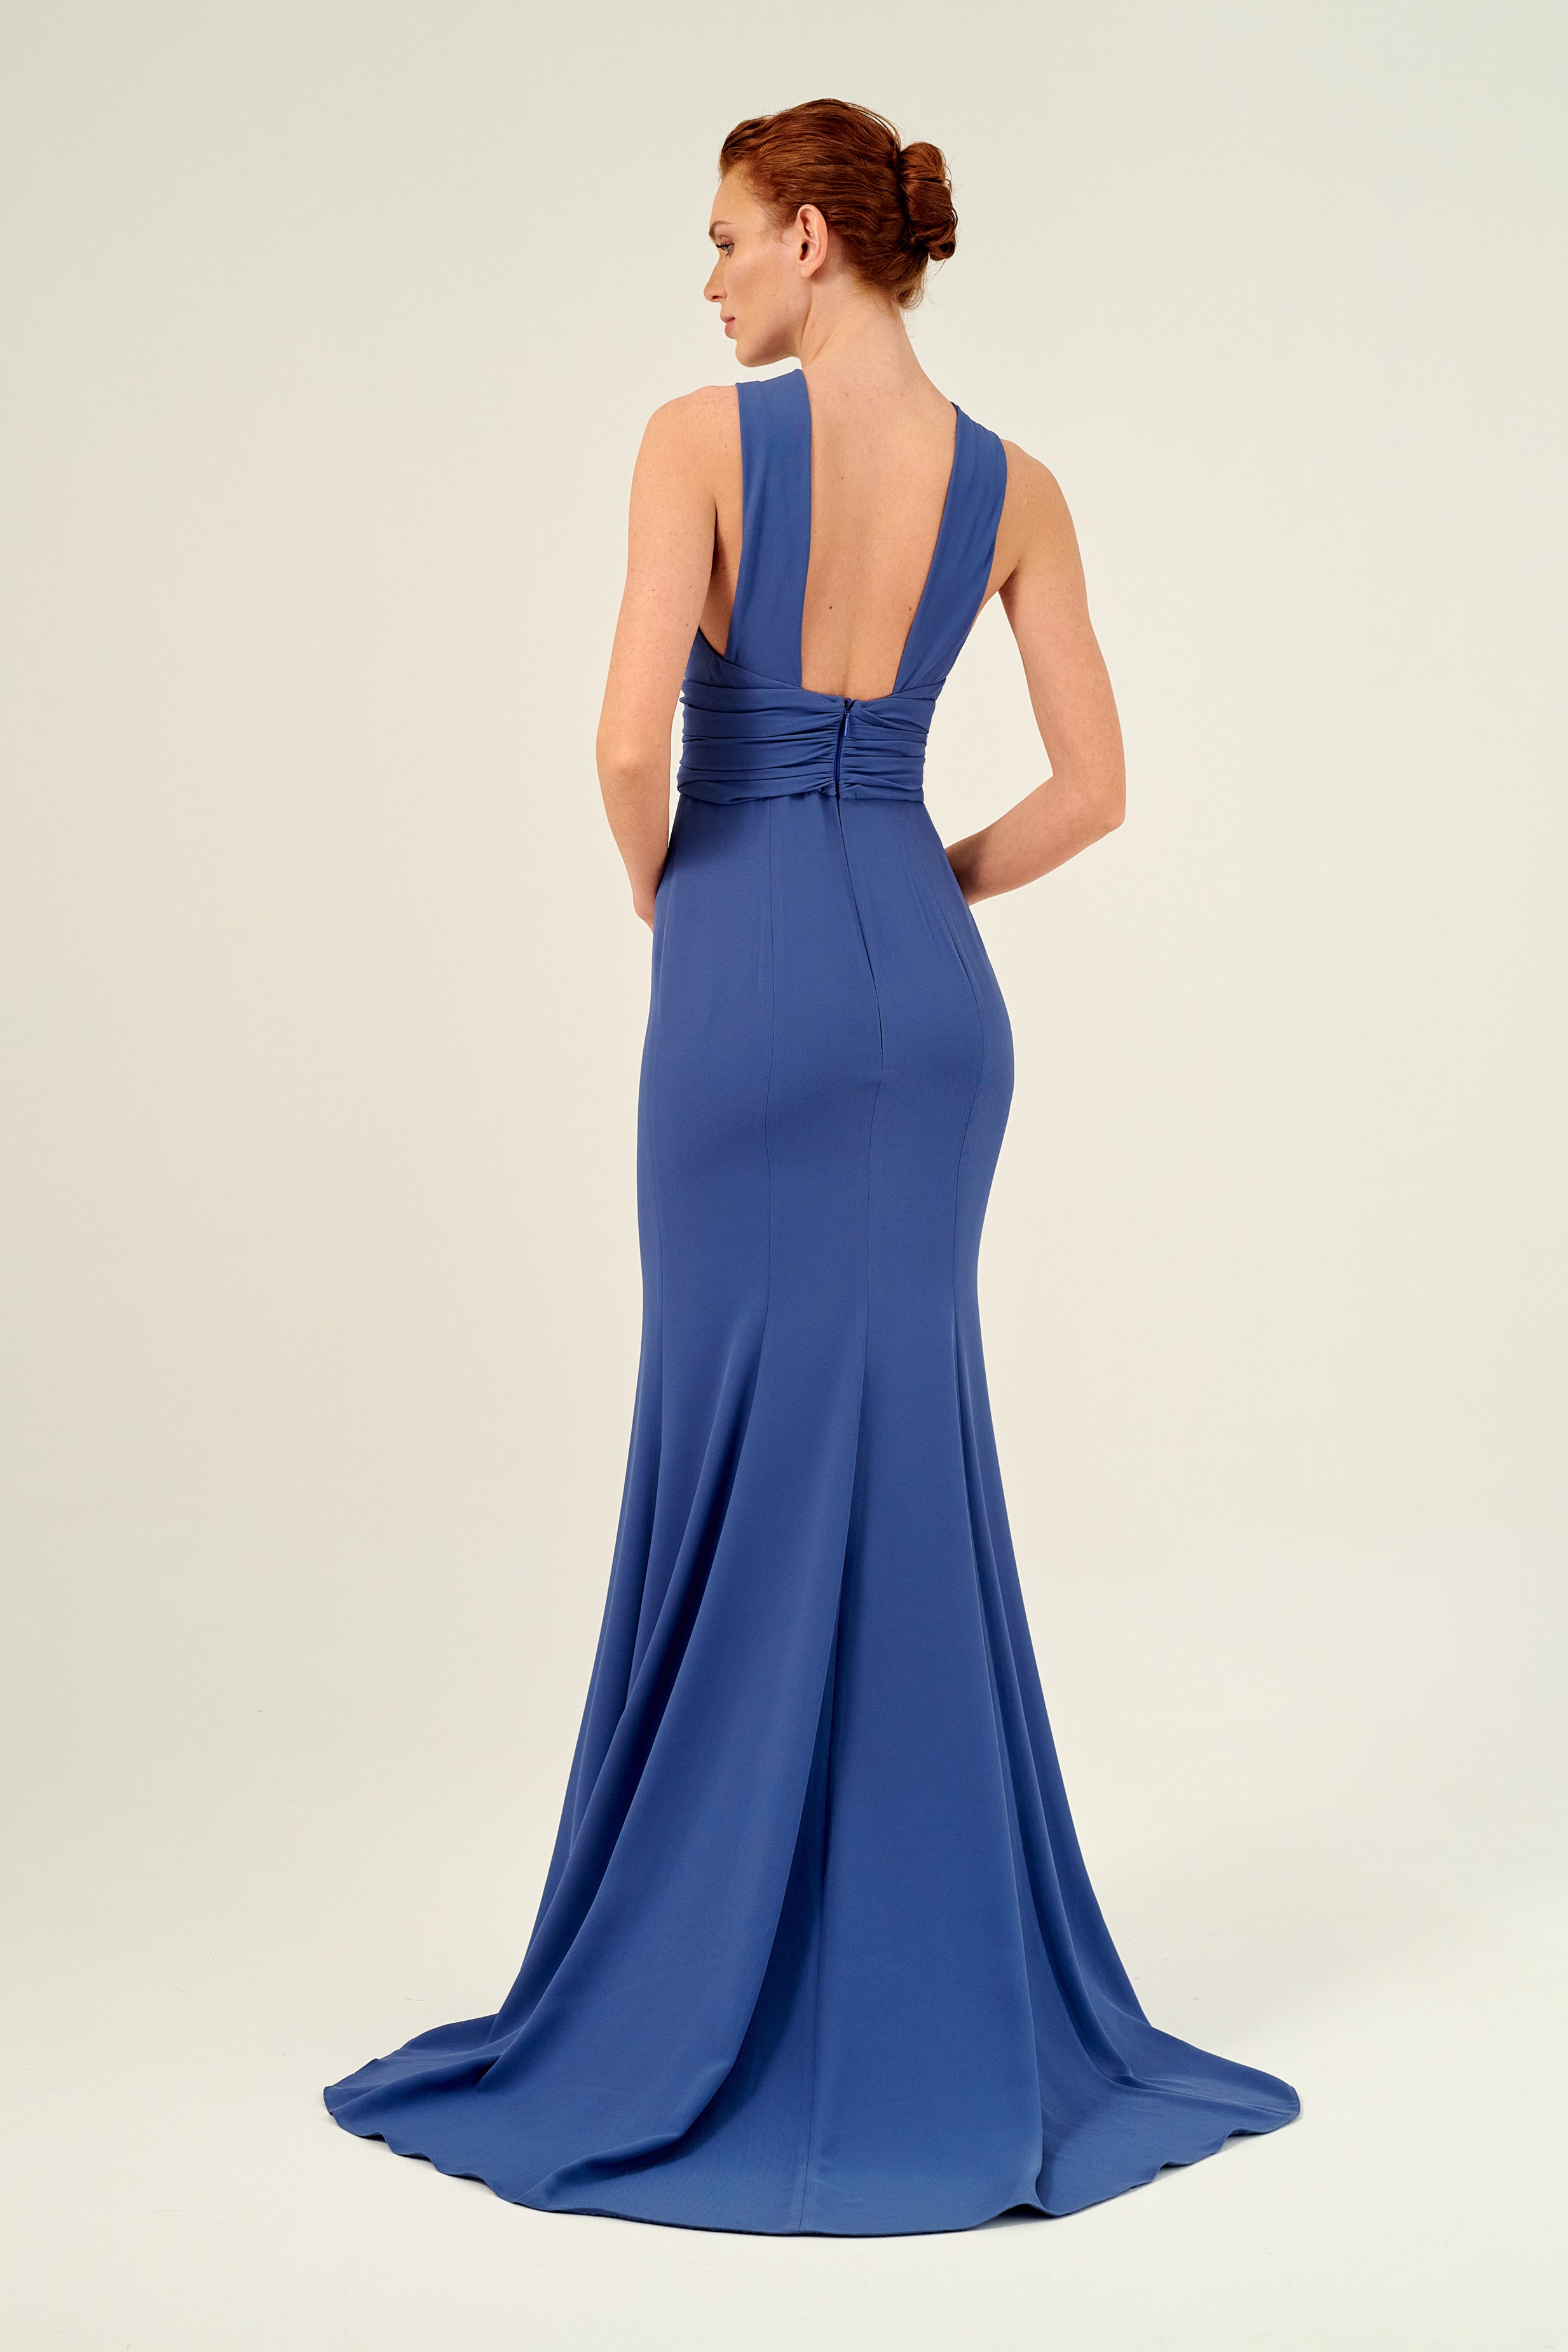 Halter Neckline with Front Keyhole Cutout Mermaid Dress